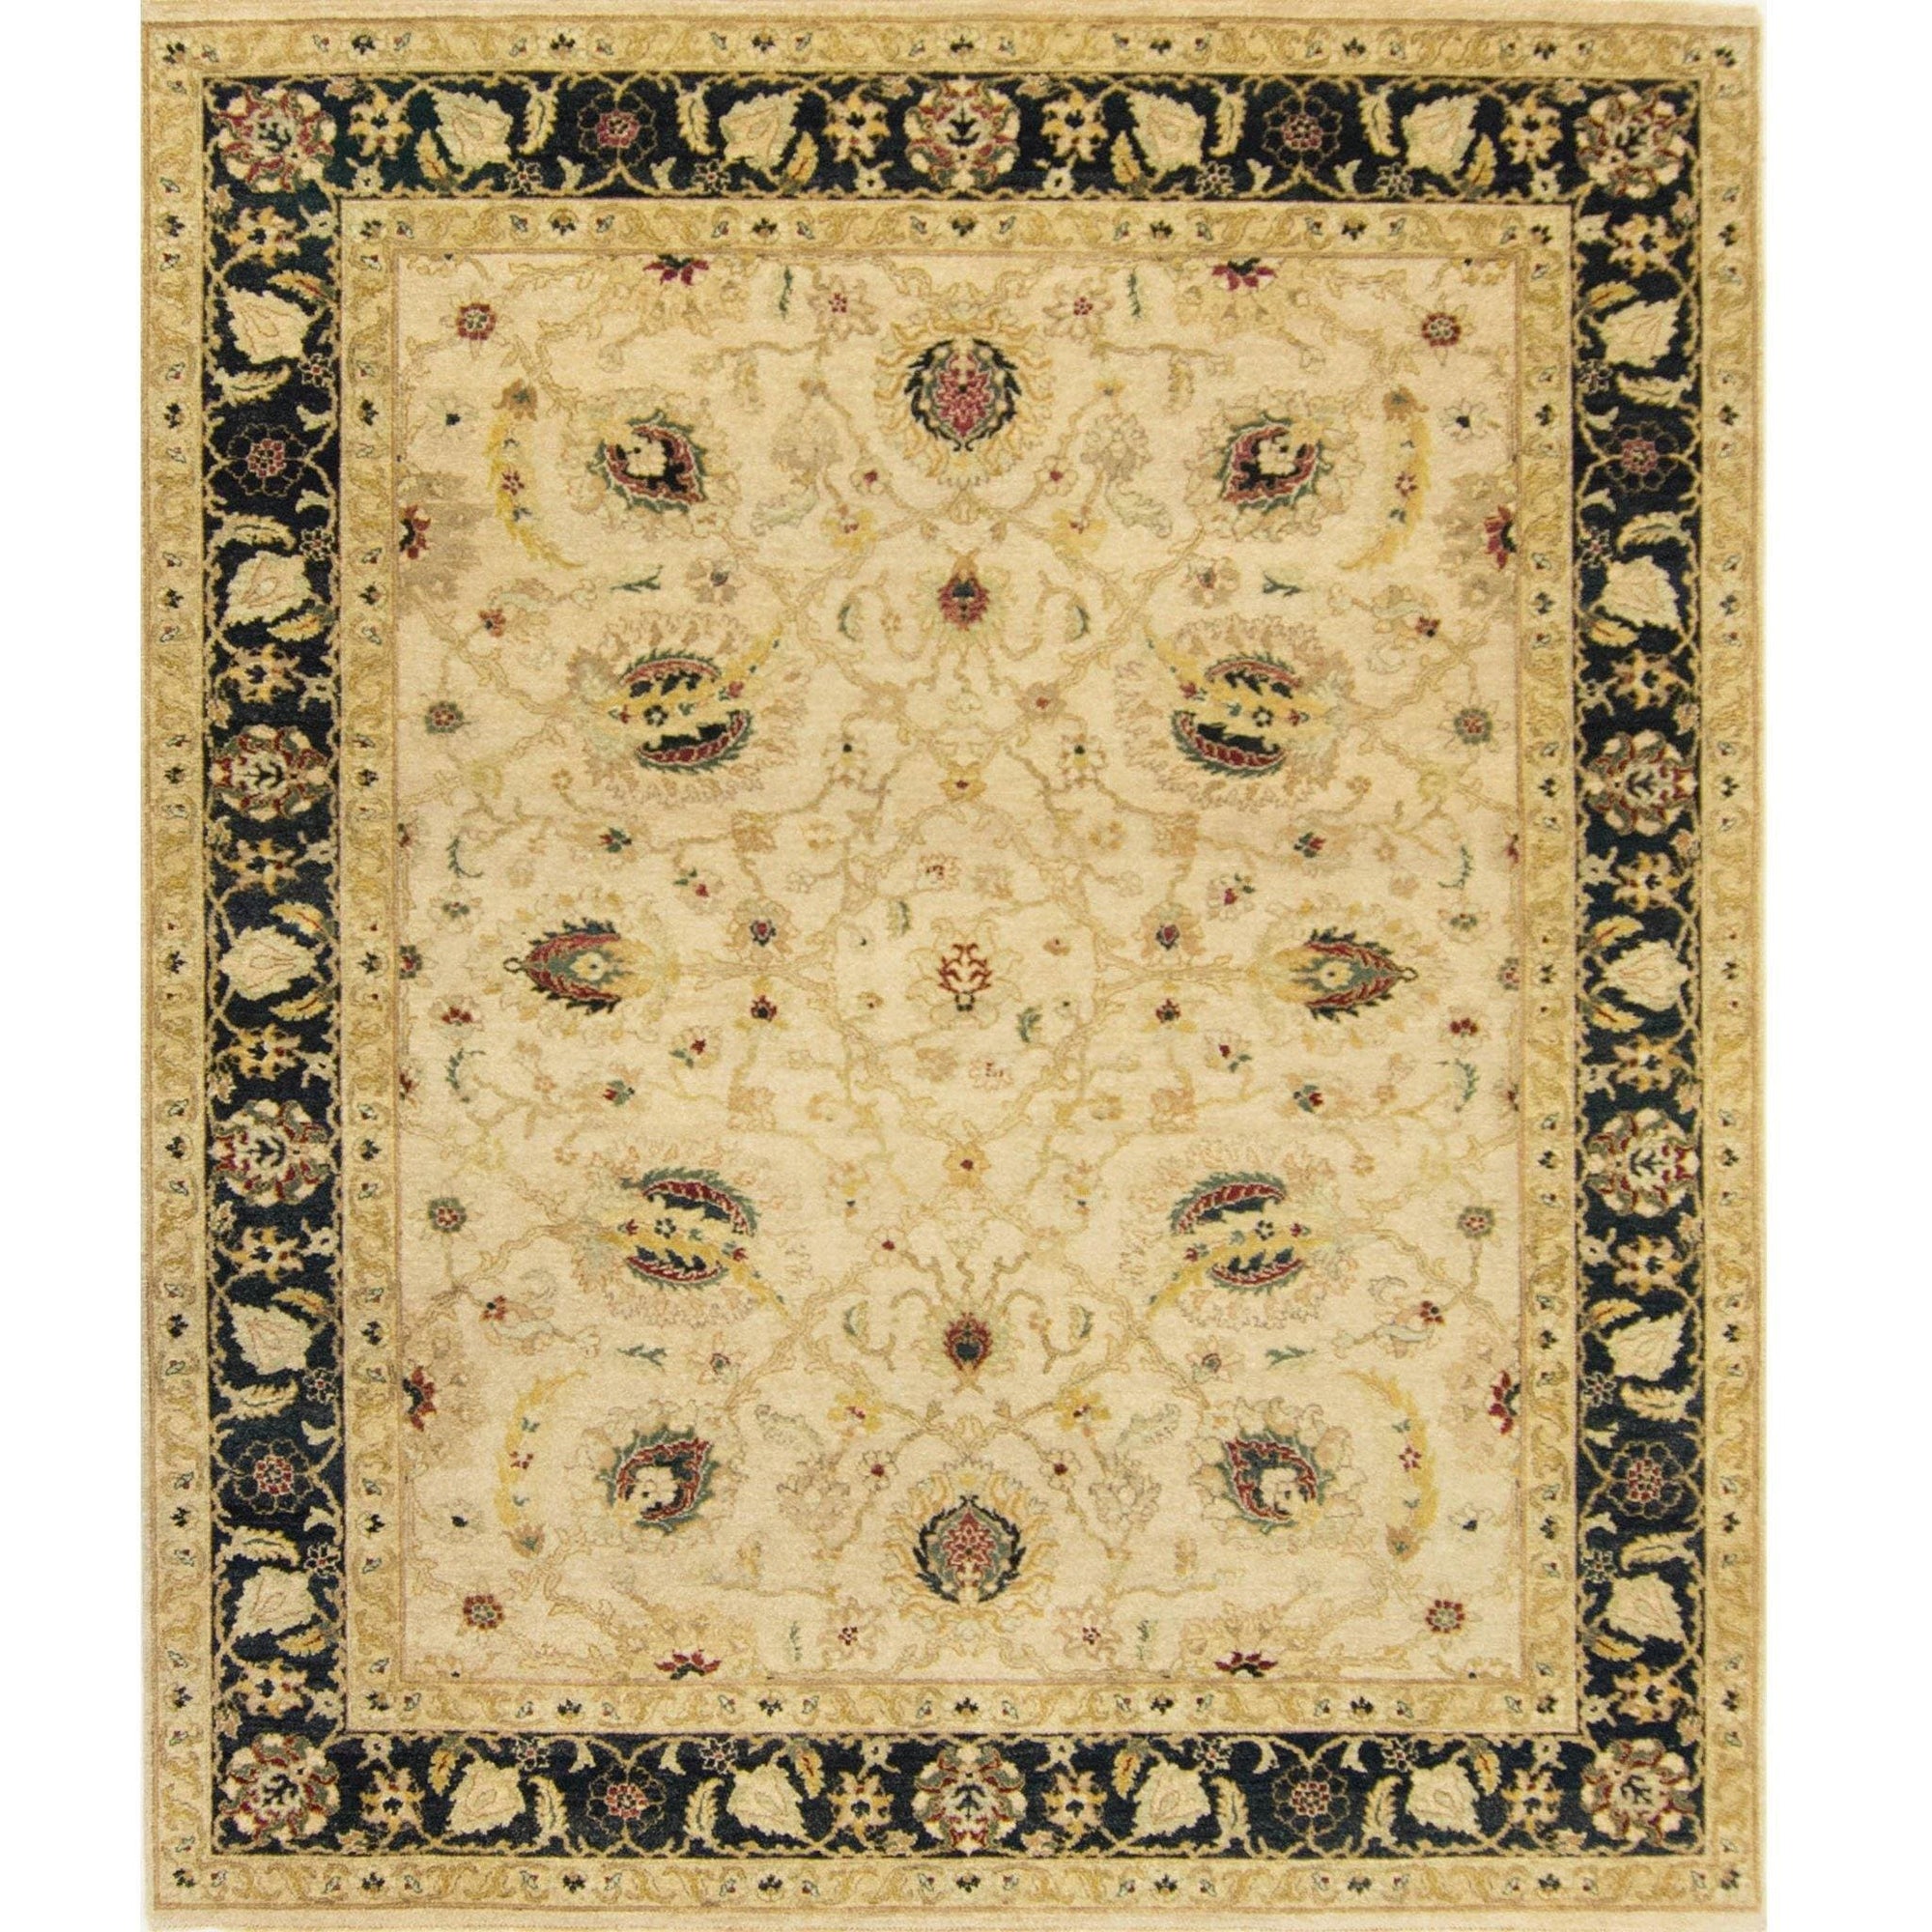 Find Hand-knotted Wool Large Rug 251cm x 305cm